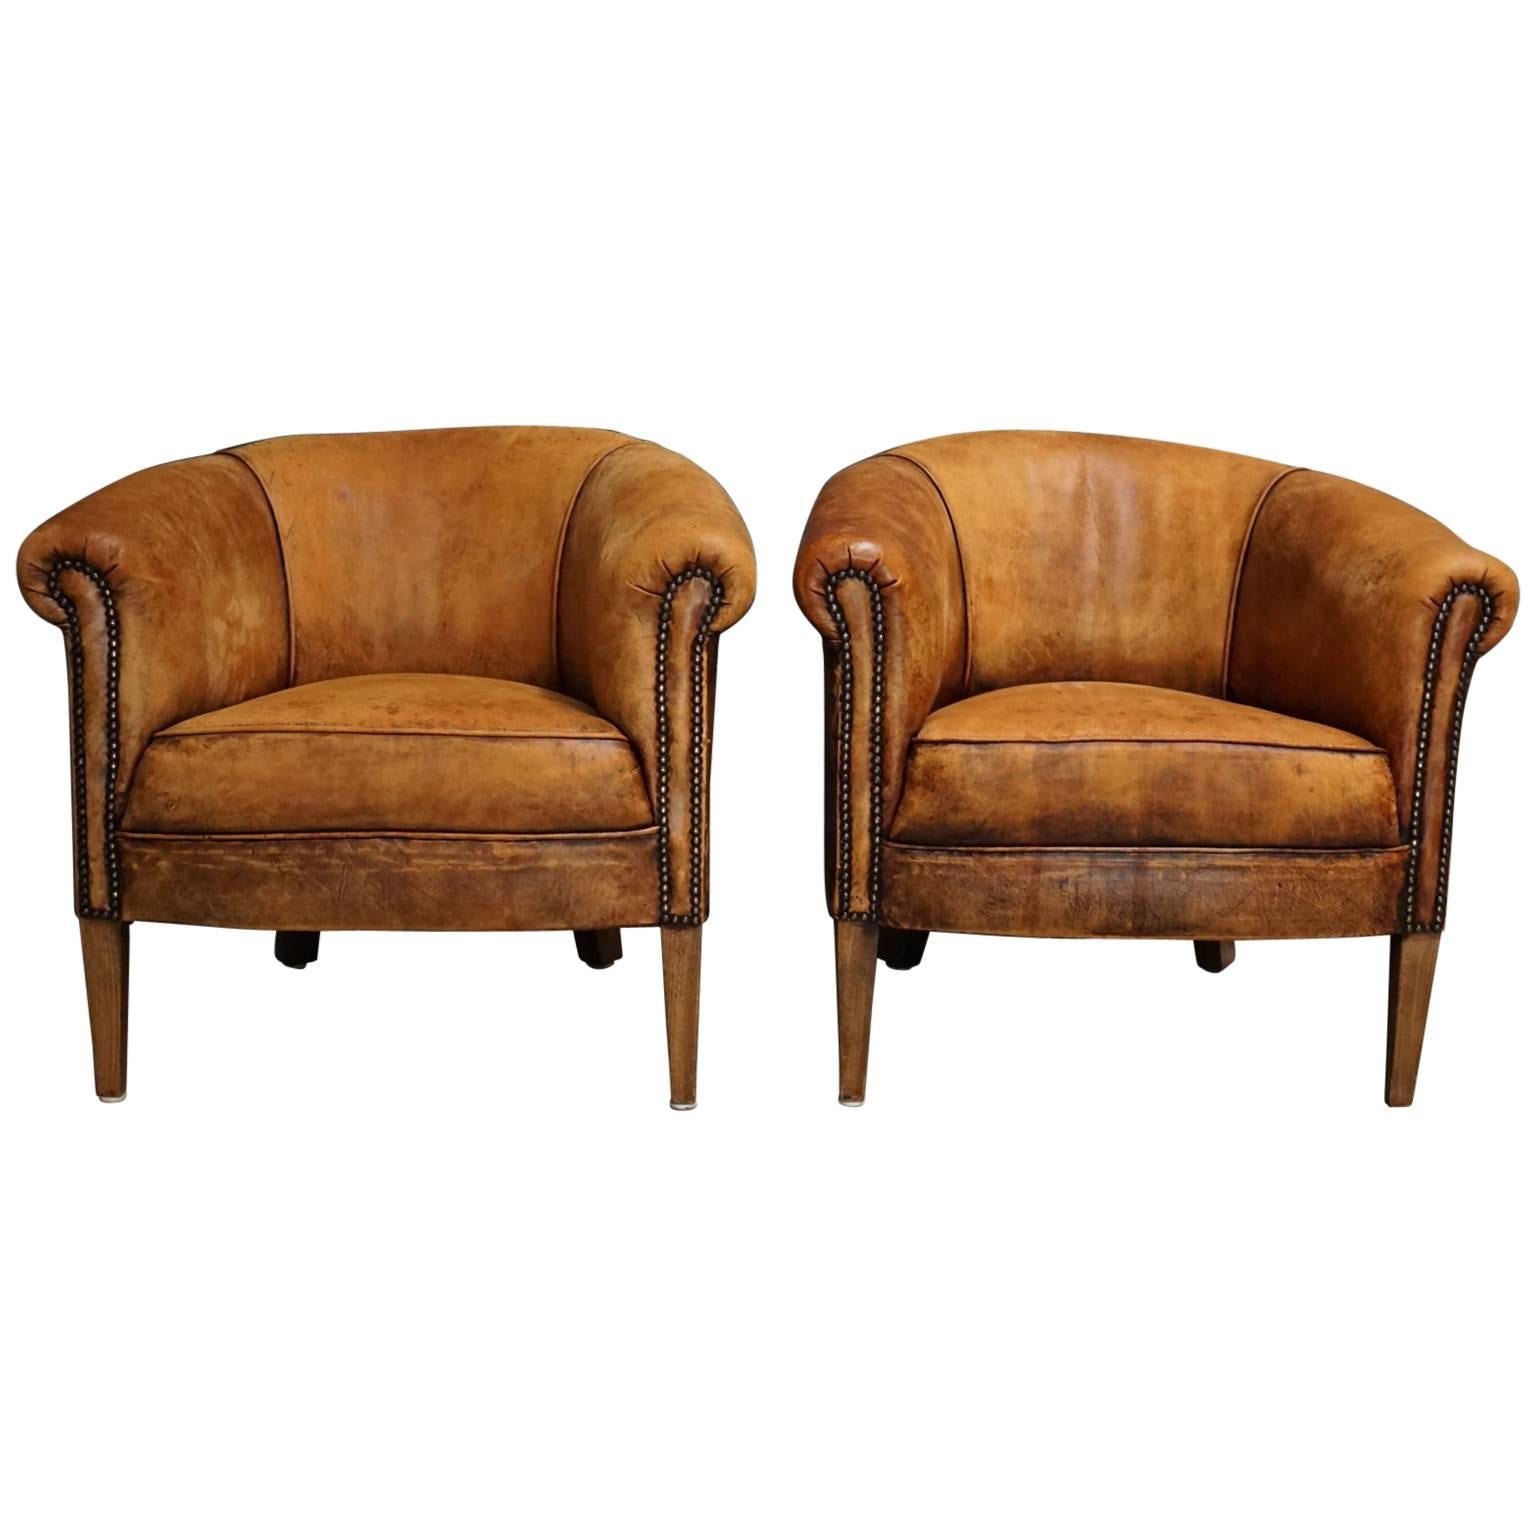 Vintage Dutch Cognac Leather Club Chairs, Set of Two